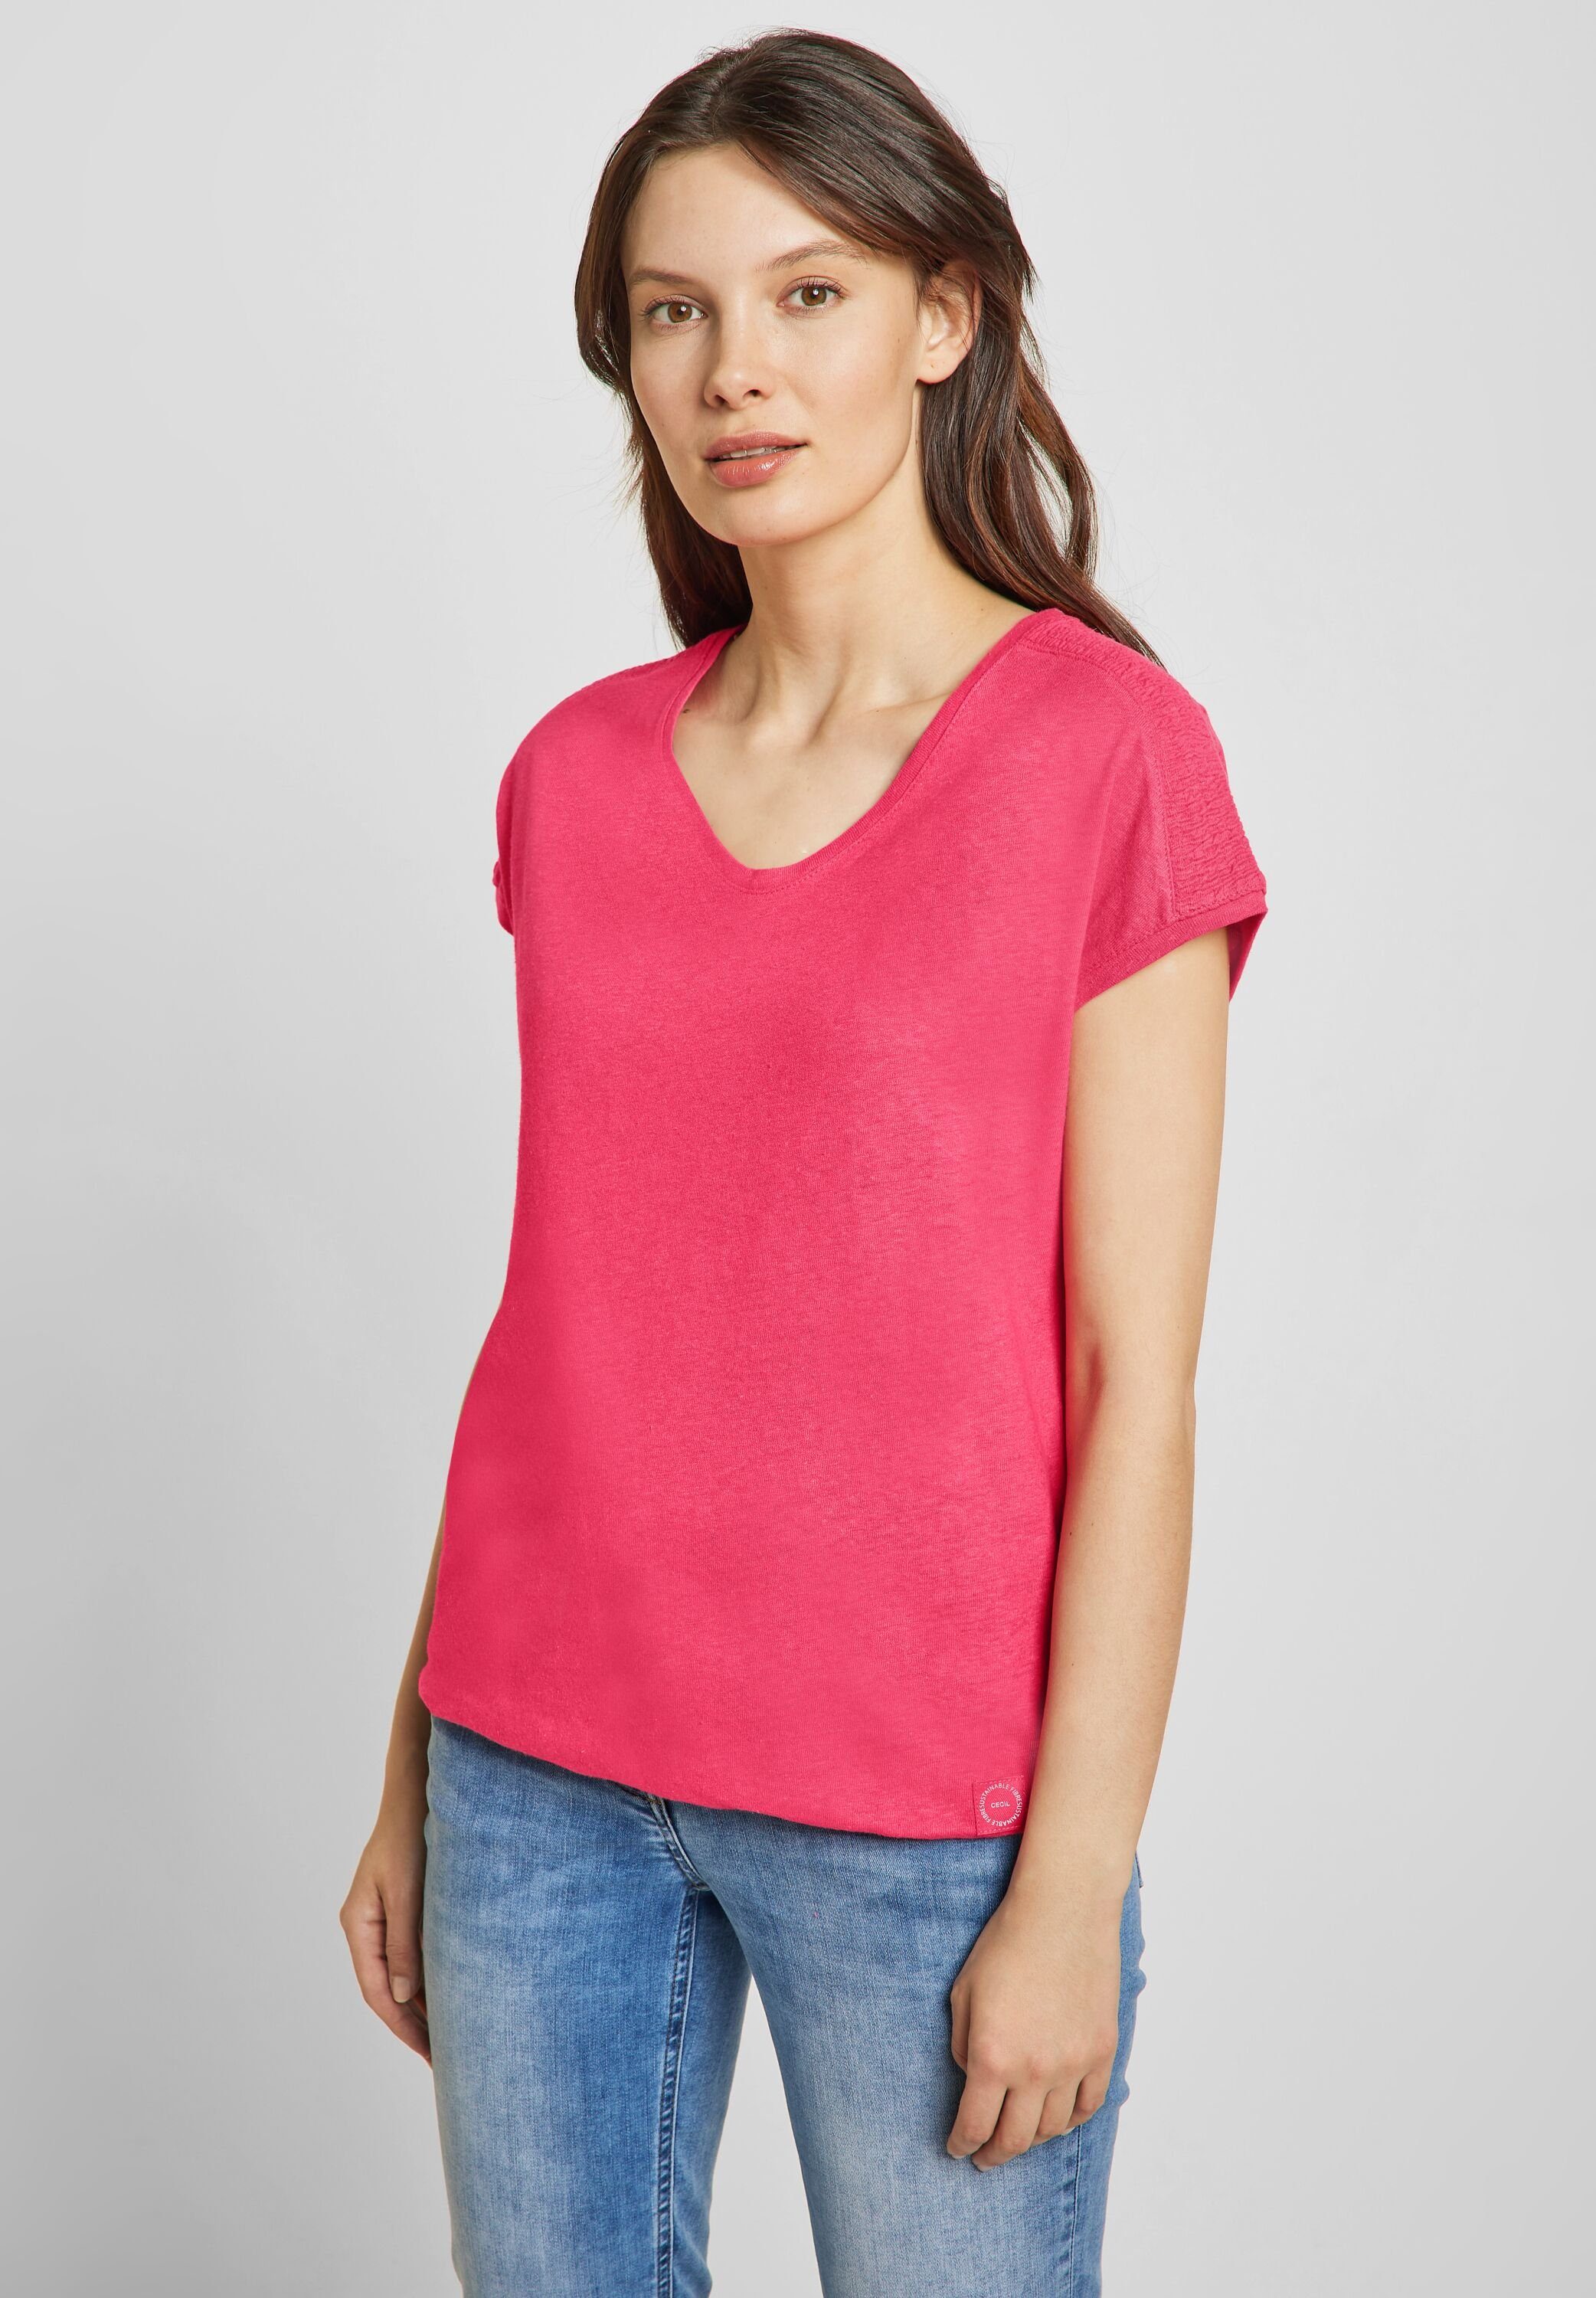 T-Shirt in Cecil strawberry red Unifarbe